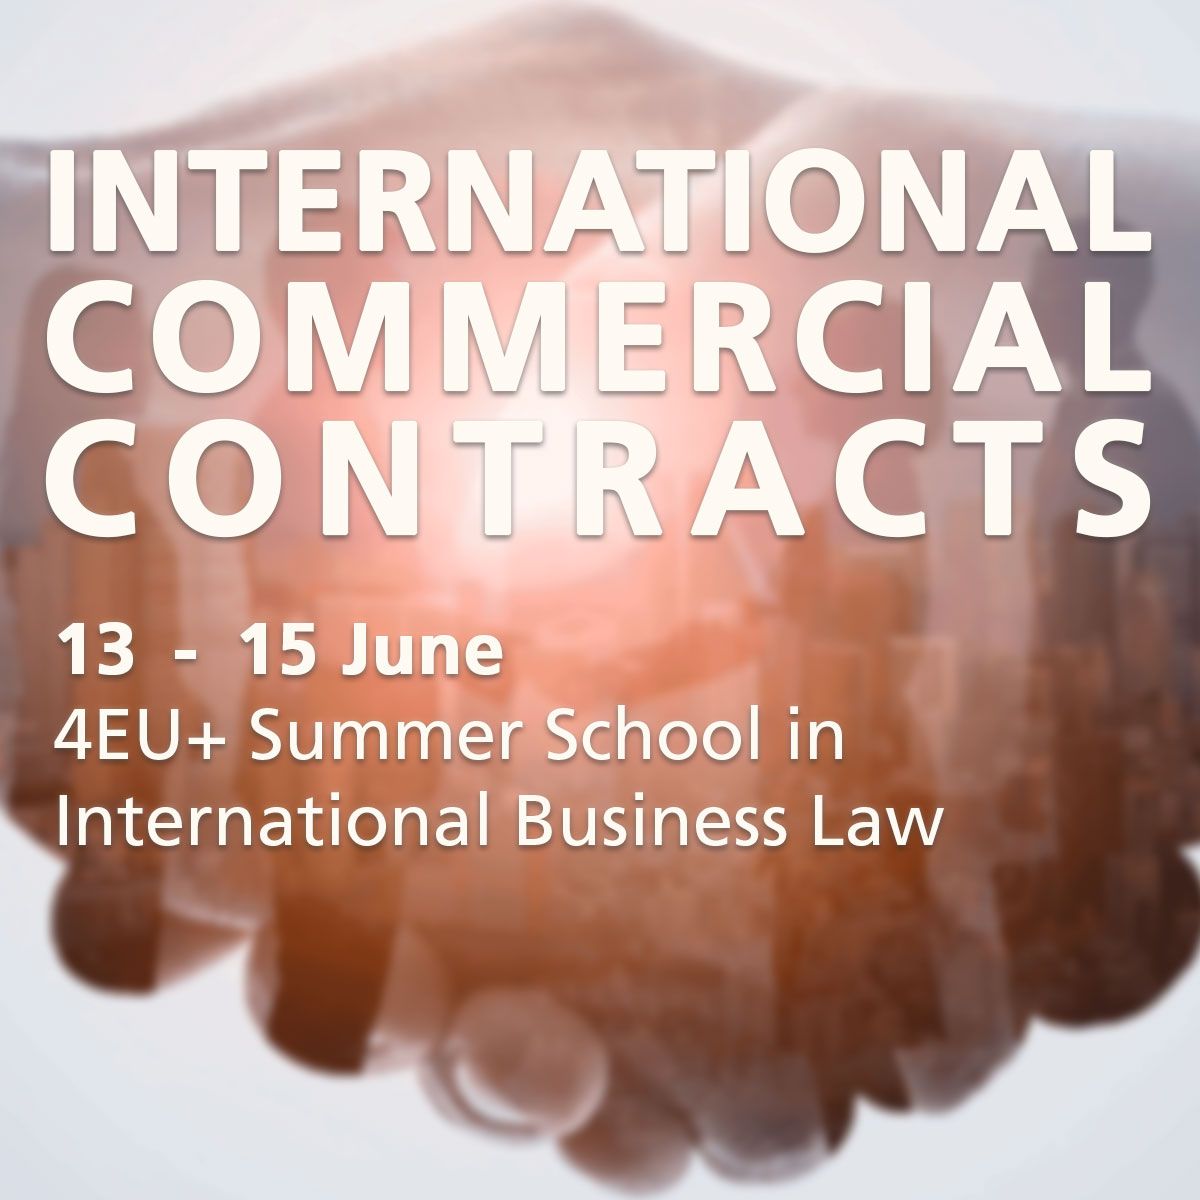 Looking forward to teaching the course on International Commercial Contracts at the upcoming 4EU+ Summer School in International Business Law